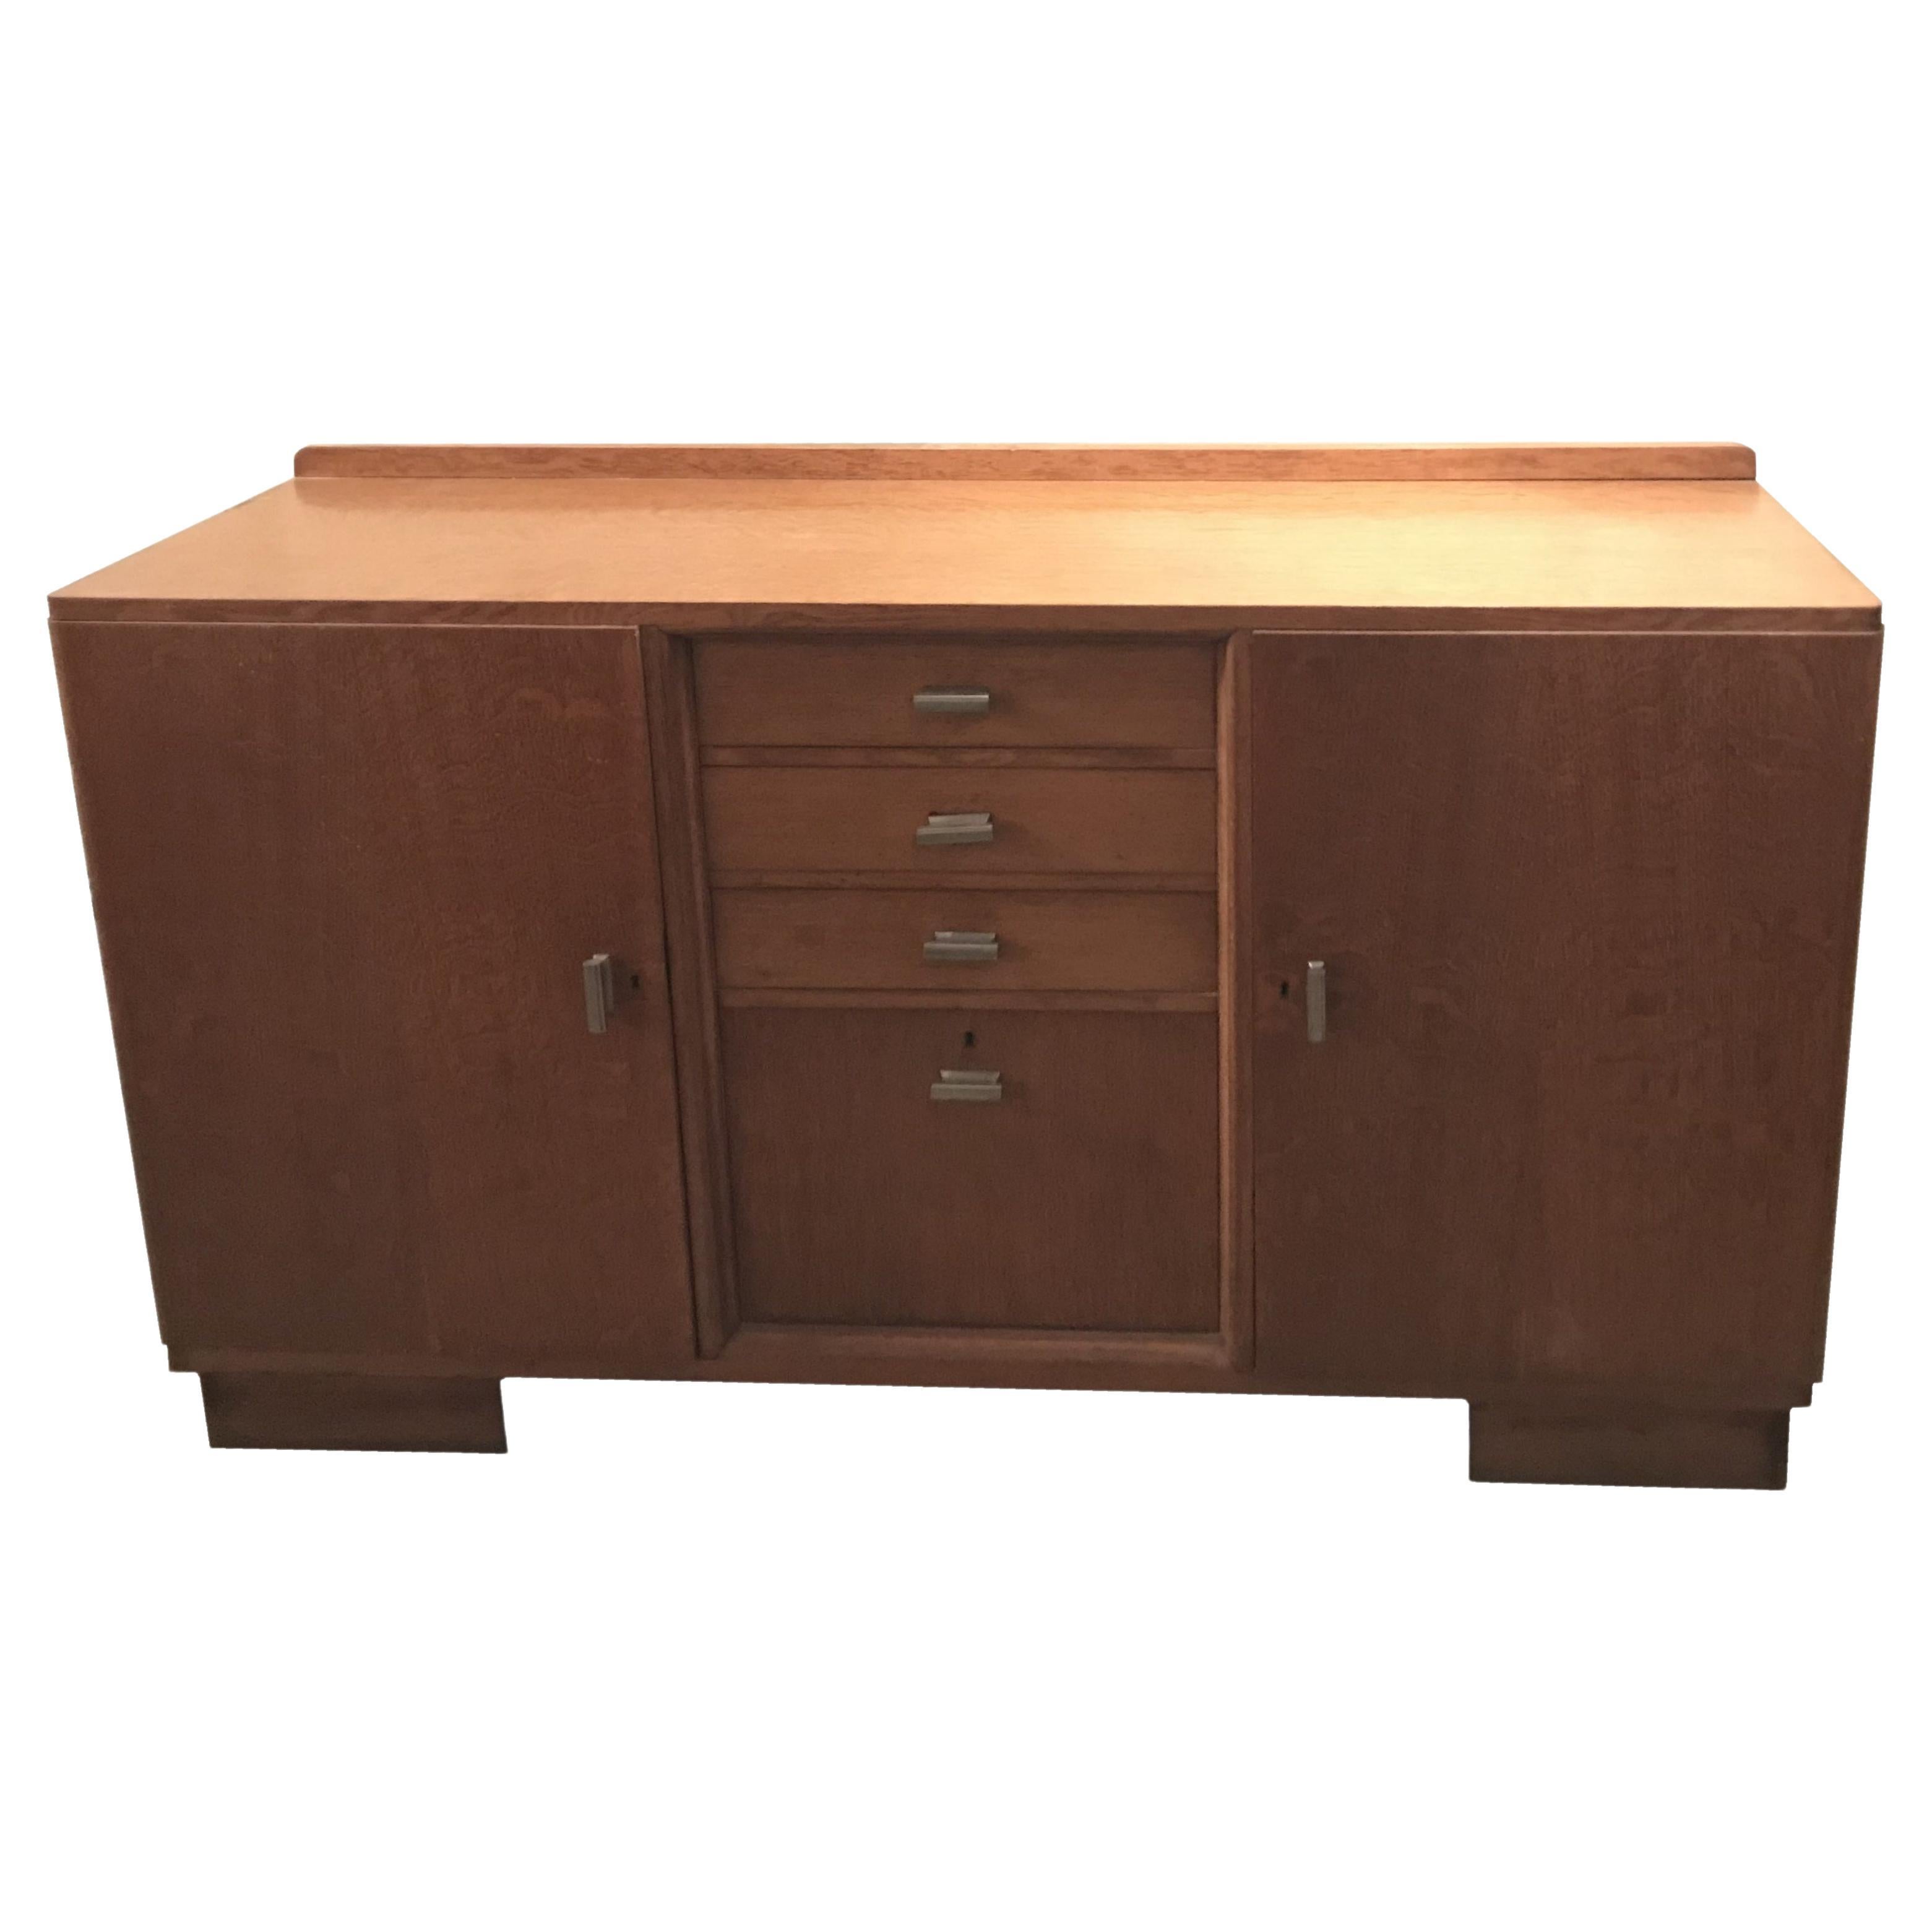 Art Deco Sideboard with Drawers in Wood, 1930 For Sale